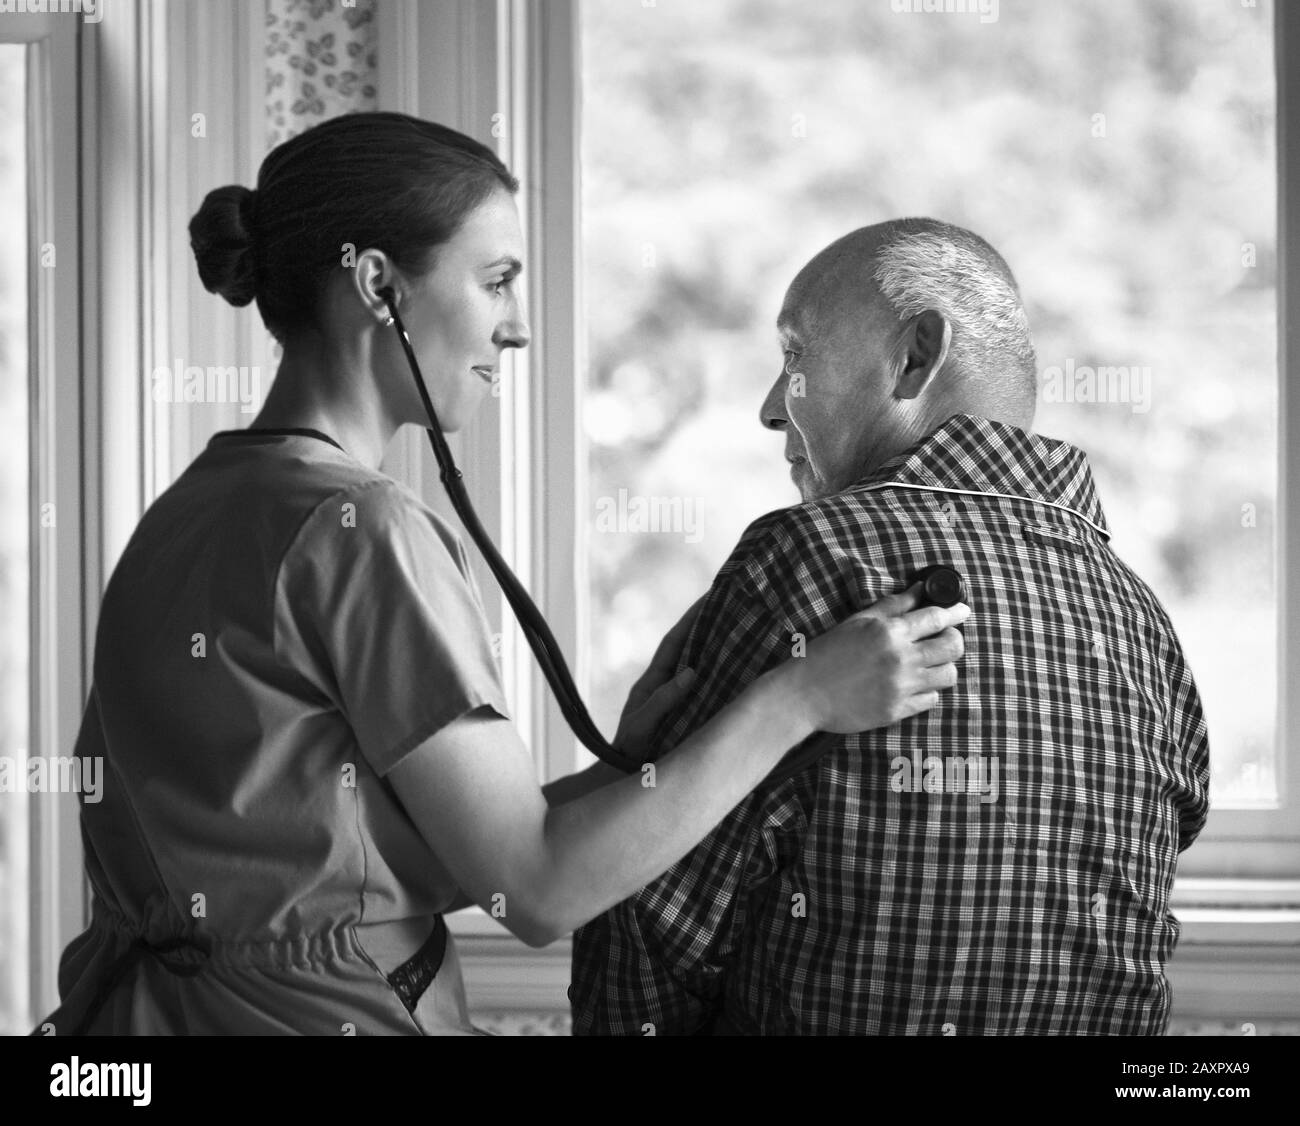 Female nurse checking an elderly man's heartbeat with a stethoscope. Stock Photo